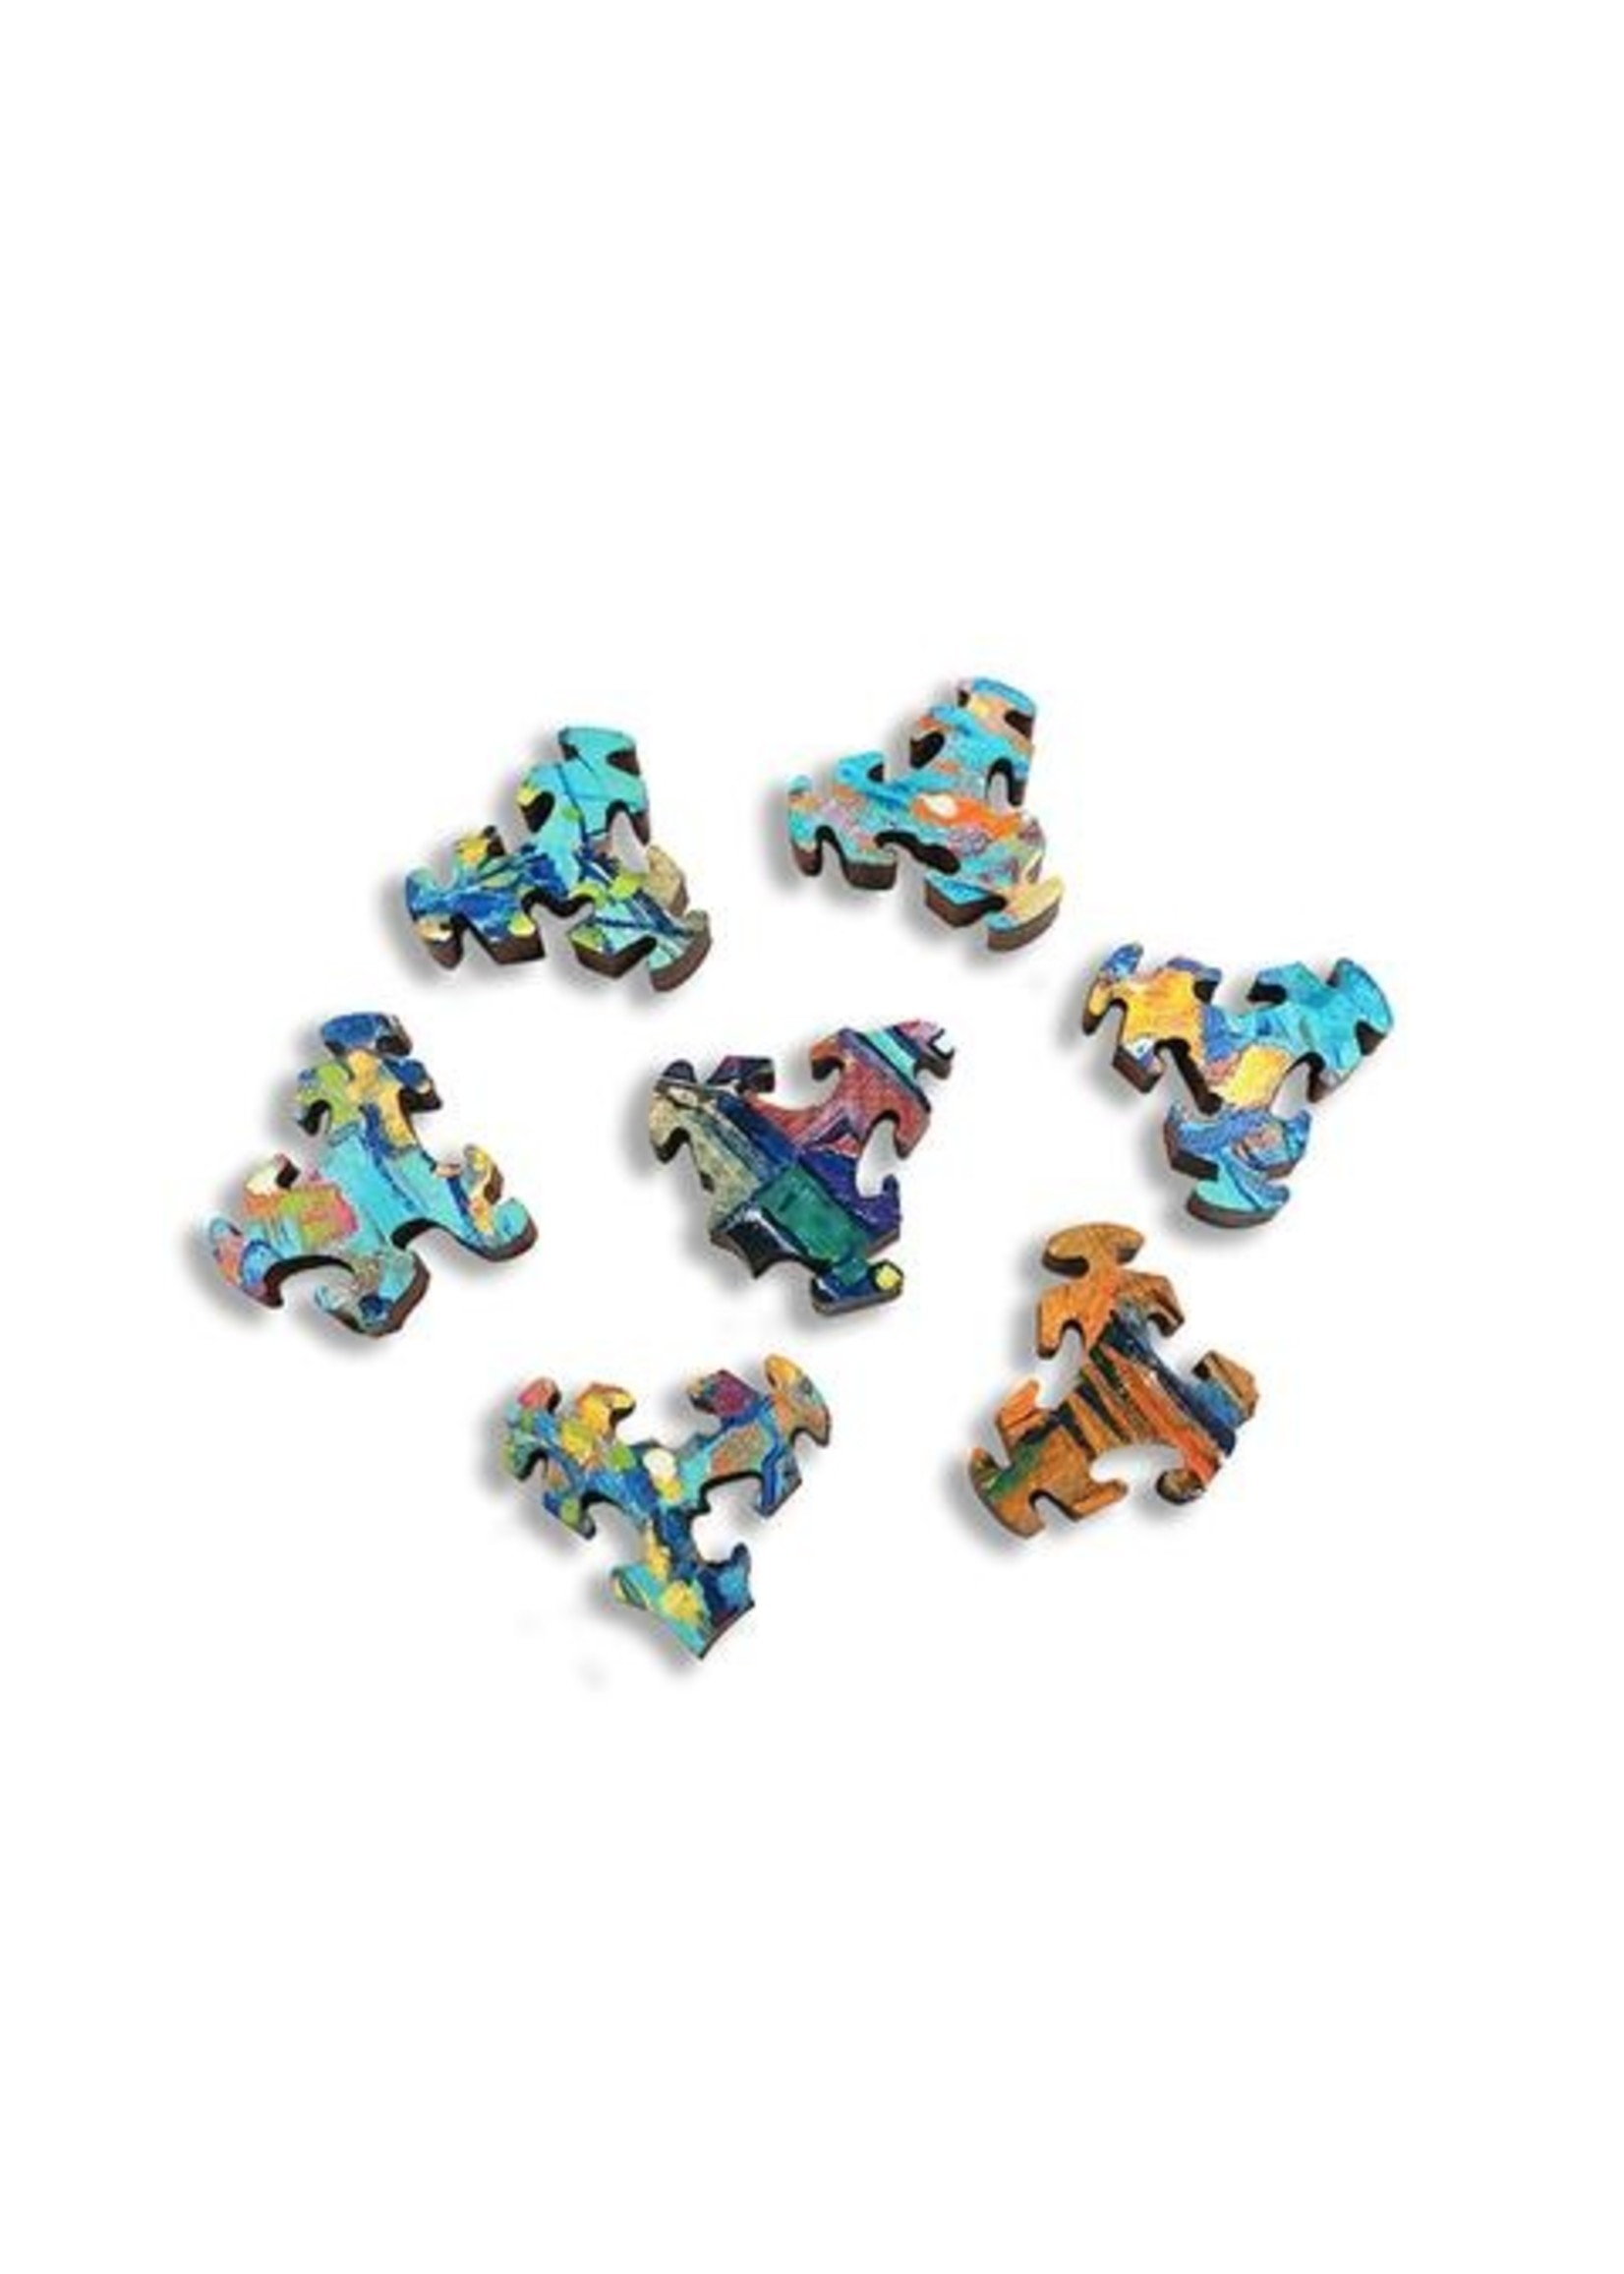 Artifact Puzzles "Fishermans' Cottages" Wooden Jigsaw Puzzle